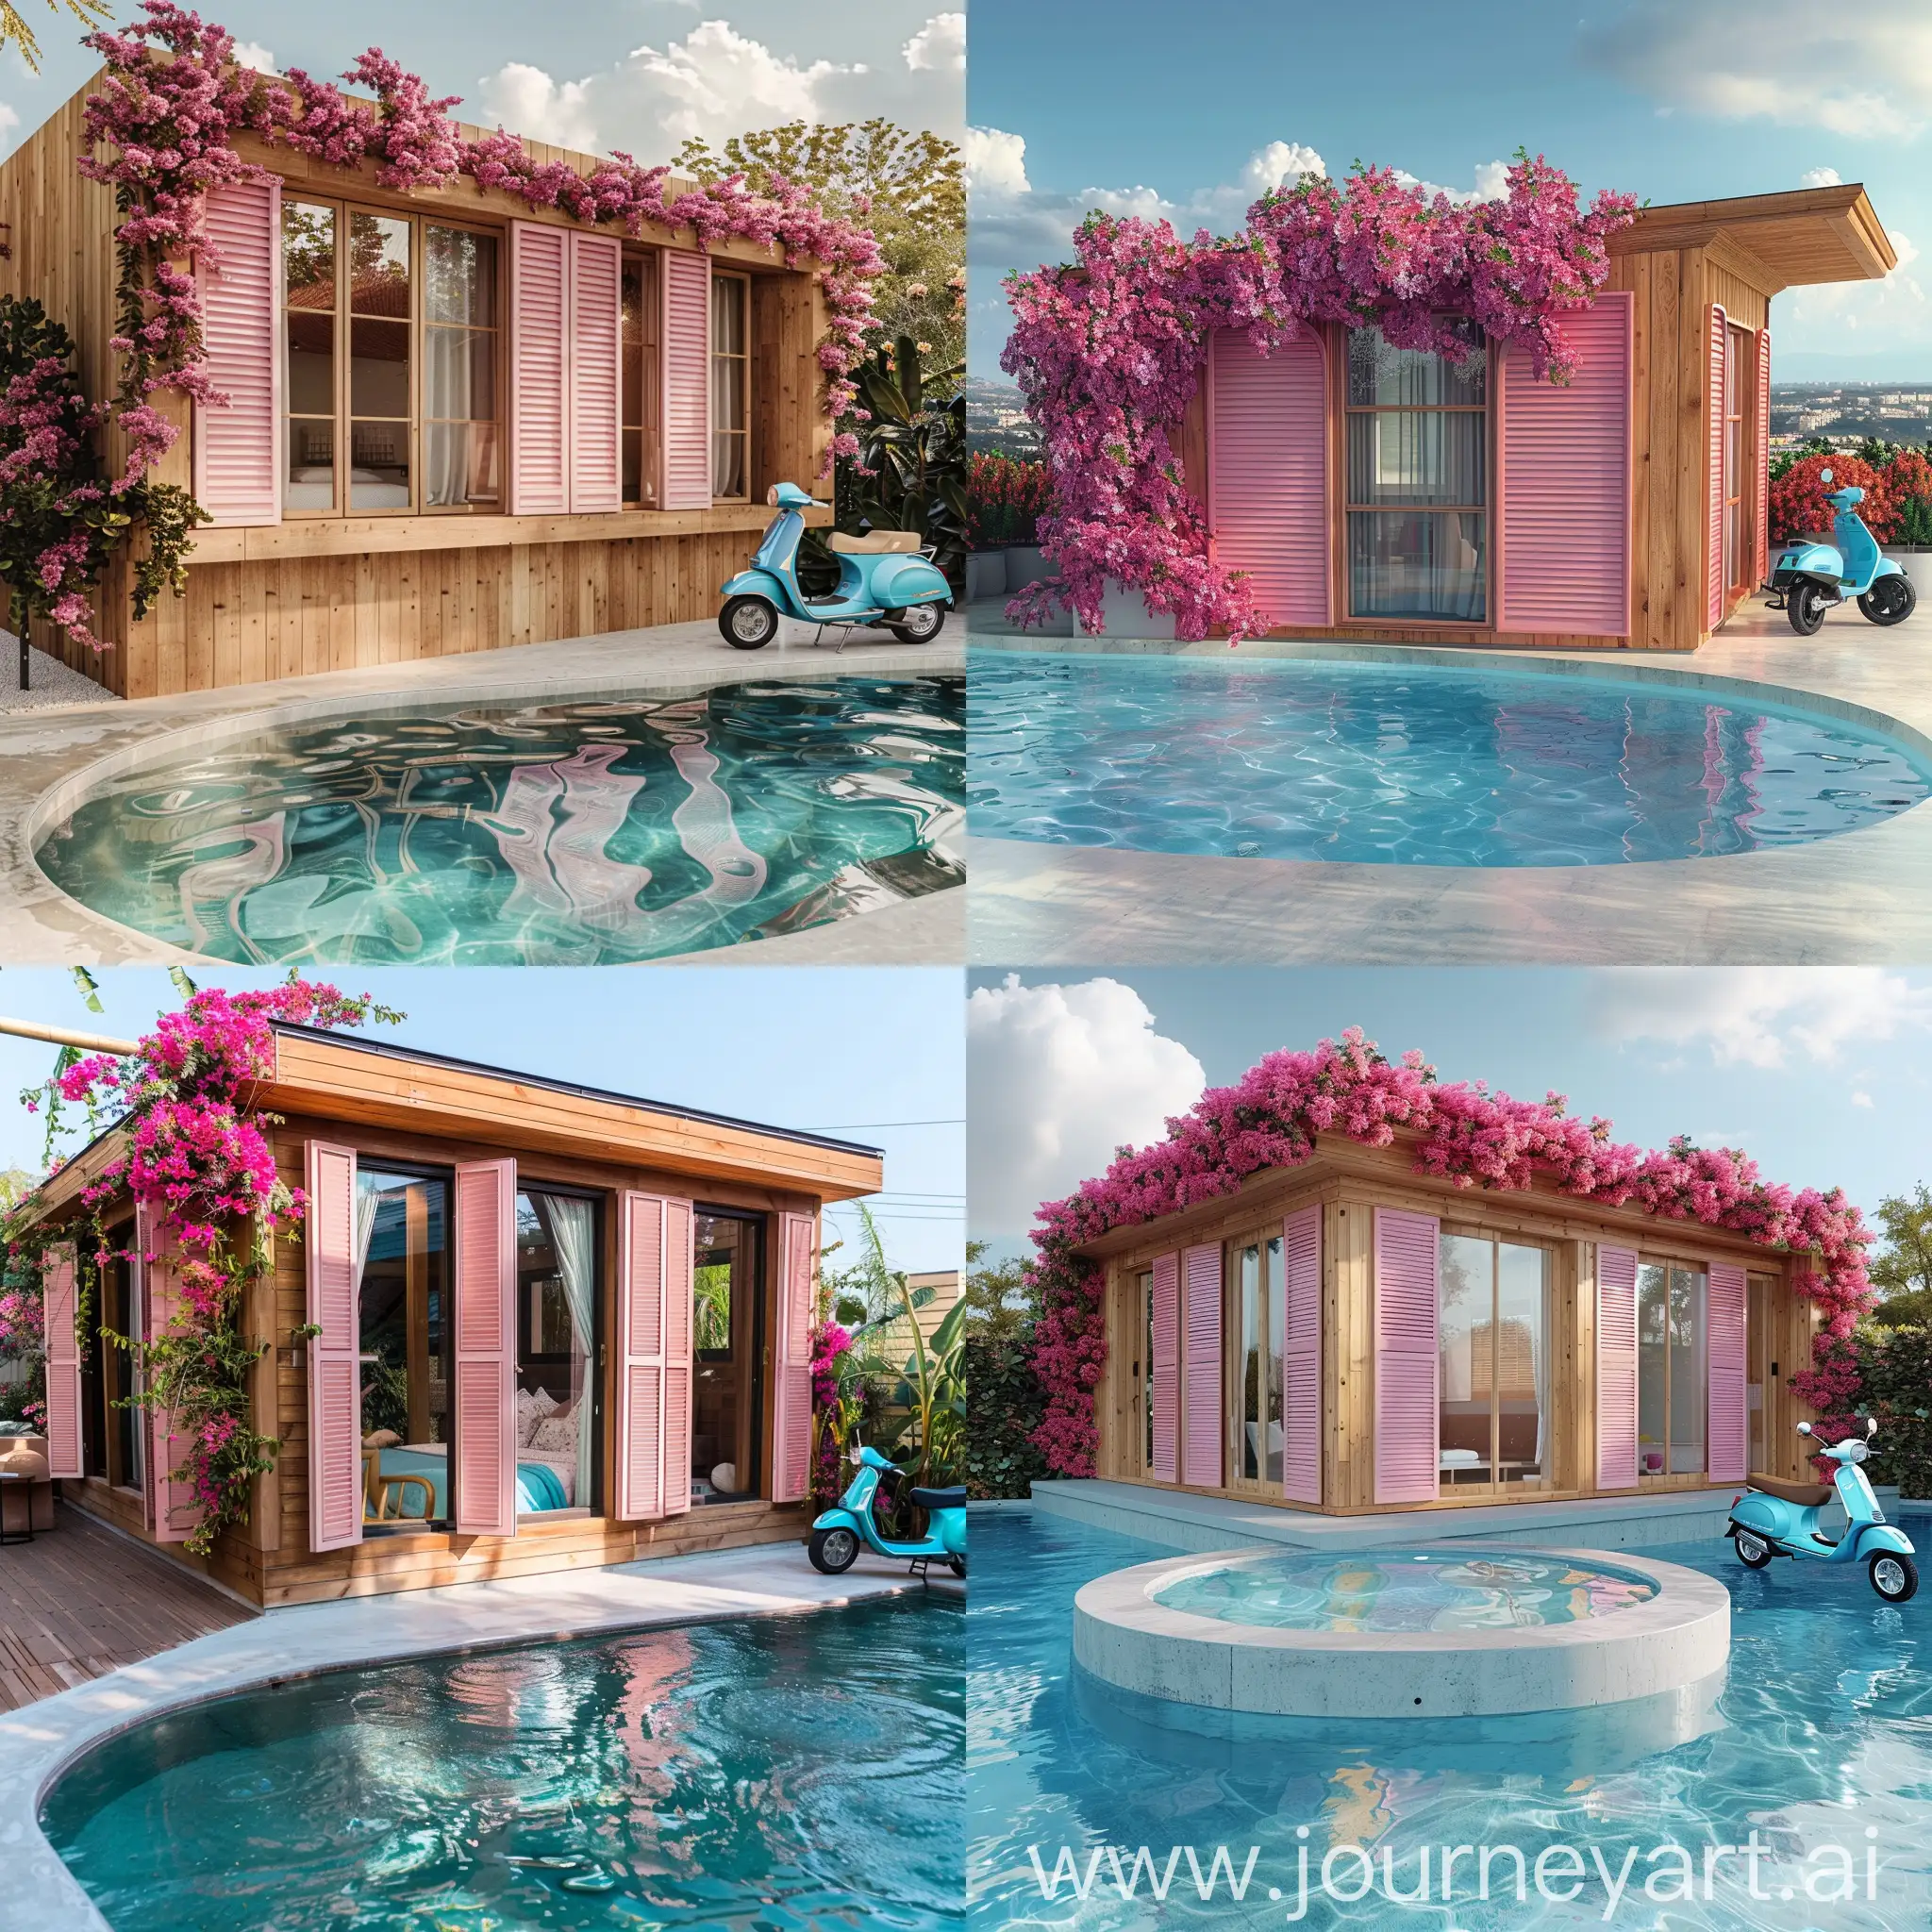 
A small wooden cottage in a modern style, featuring large windows with pink shutters. Bougainvillea in shades of pink grows on the house's walls. In front of the cottage, there's a large oval-shaped concrete pool with crystal-clear water. Adjacent to it, there's a sky-blue Vespa parked.